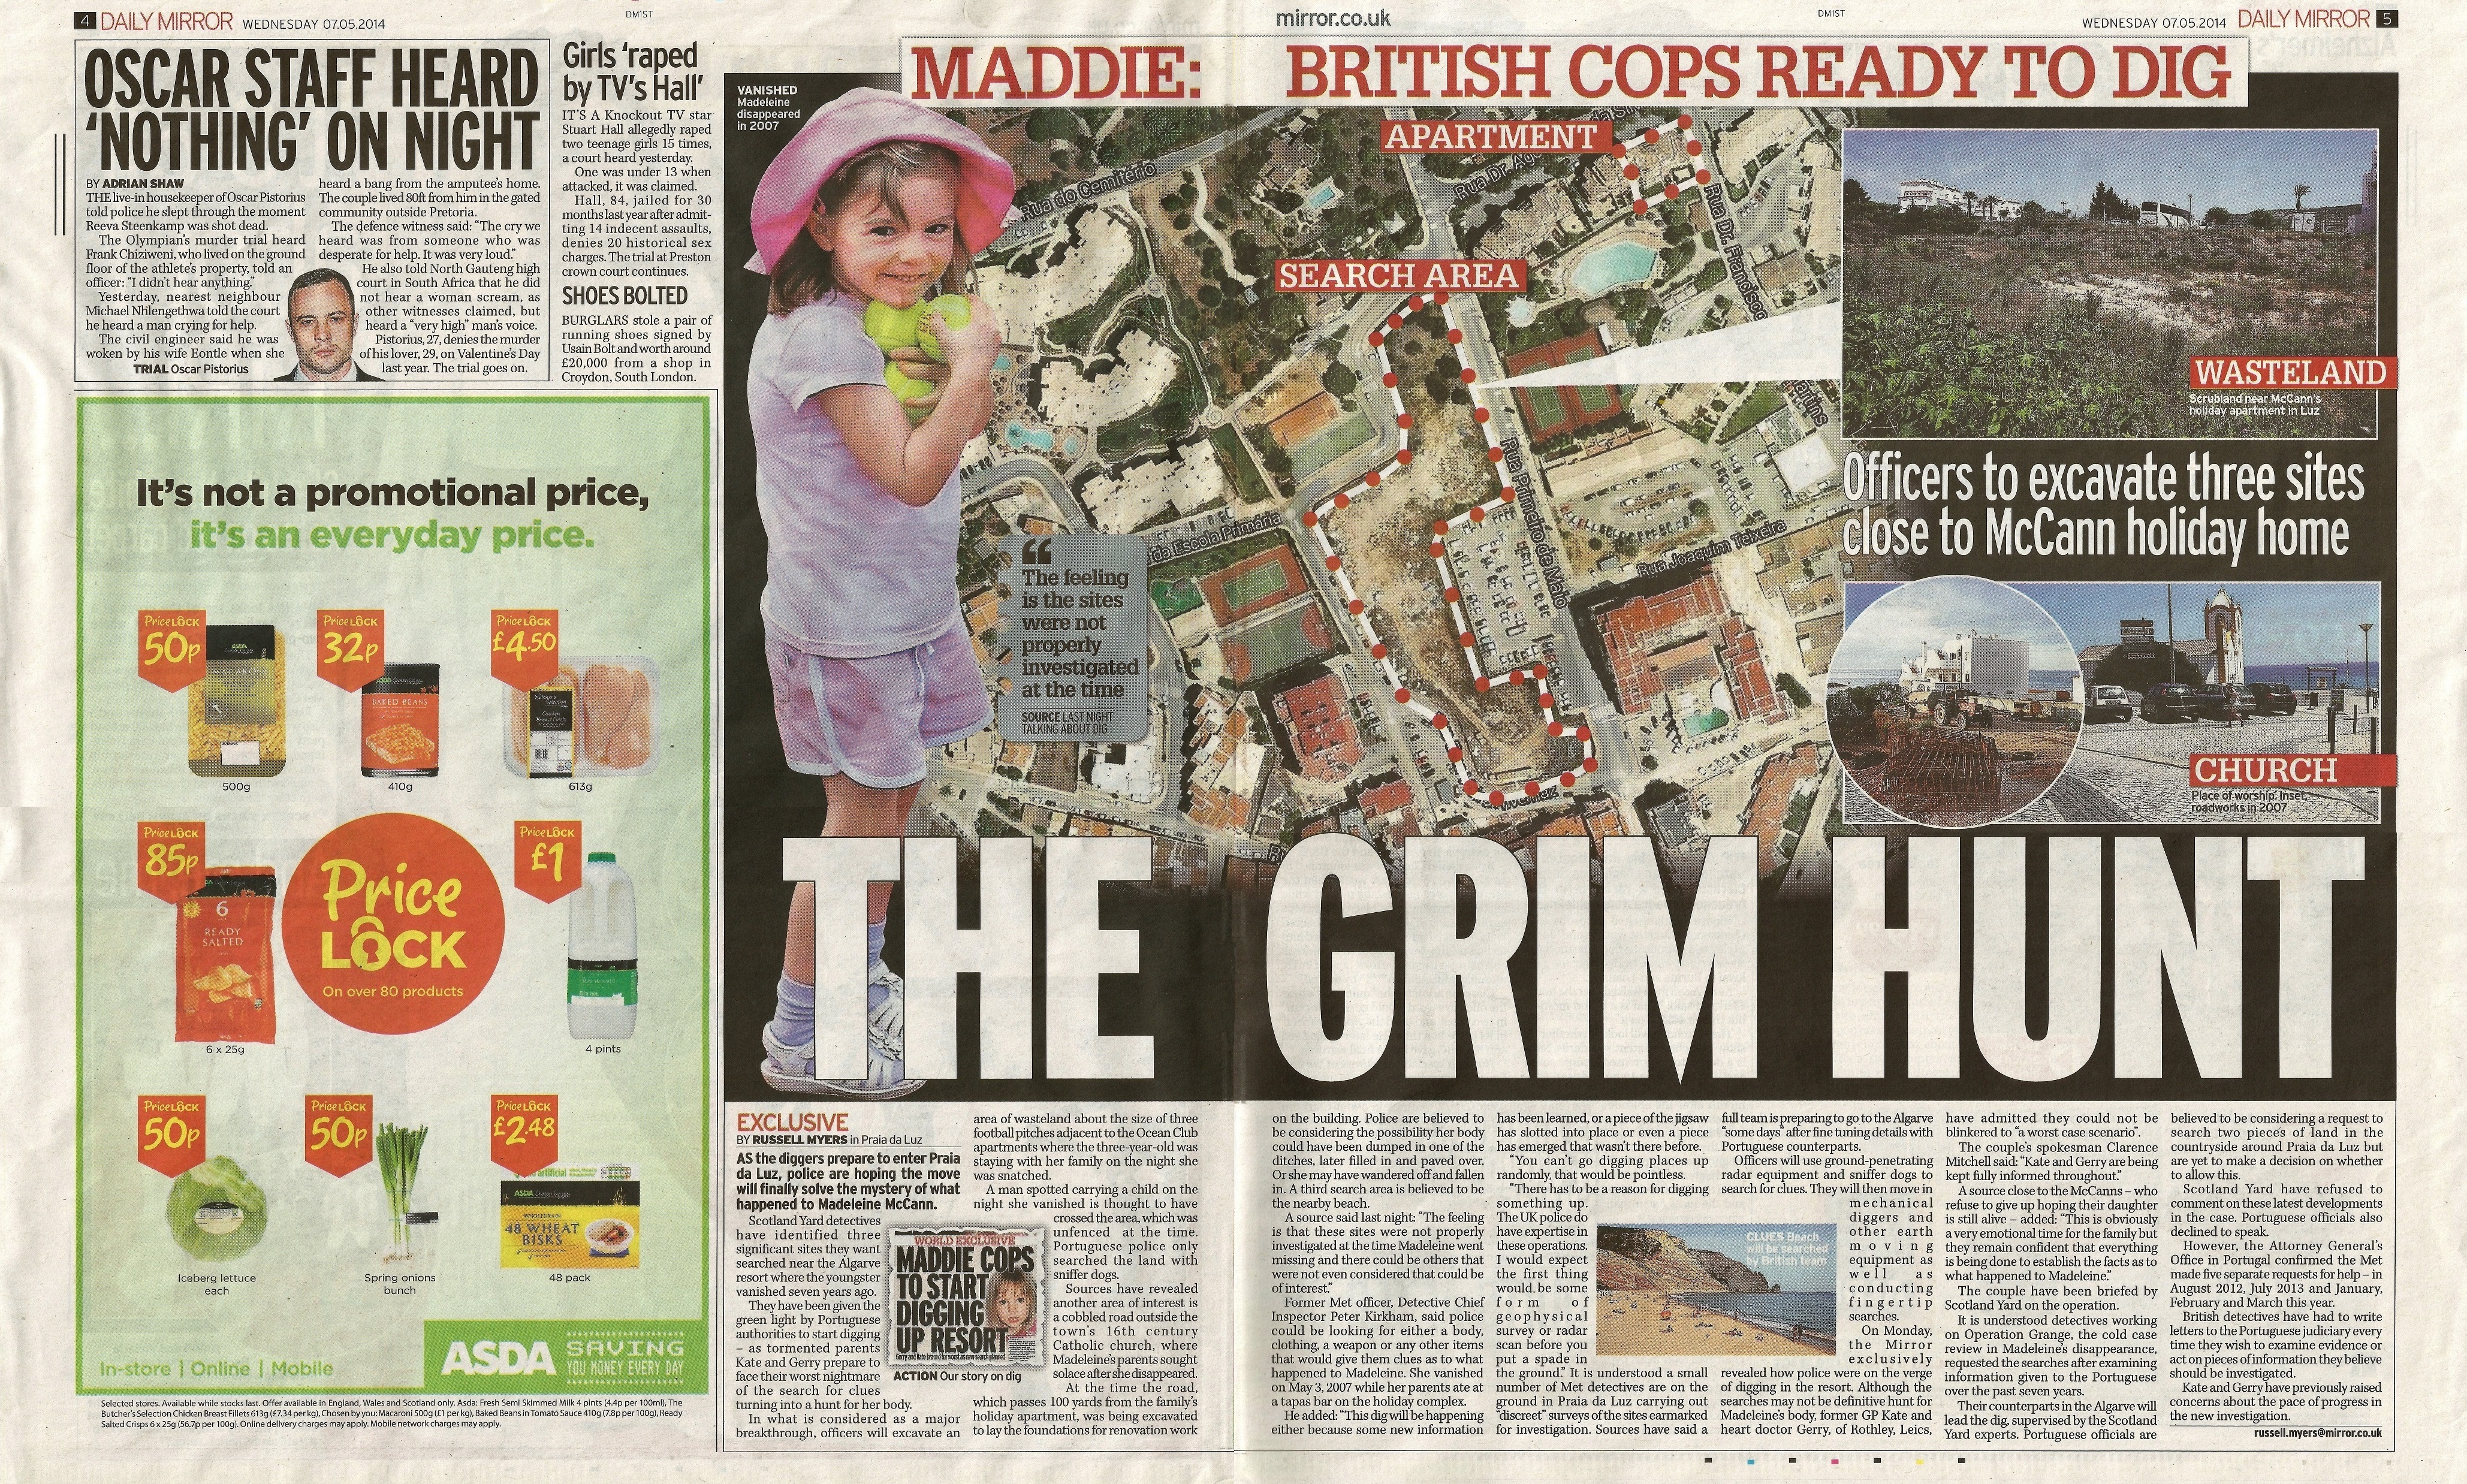 'THE GRIM HUNT' - Daily Mirror (paper edition, pages 4&5)